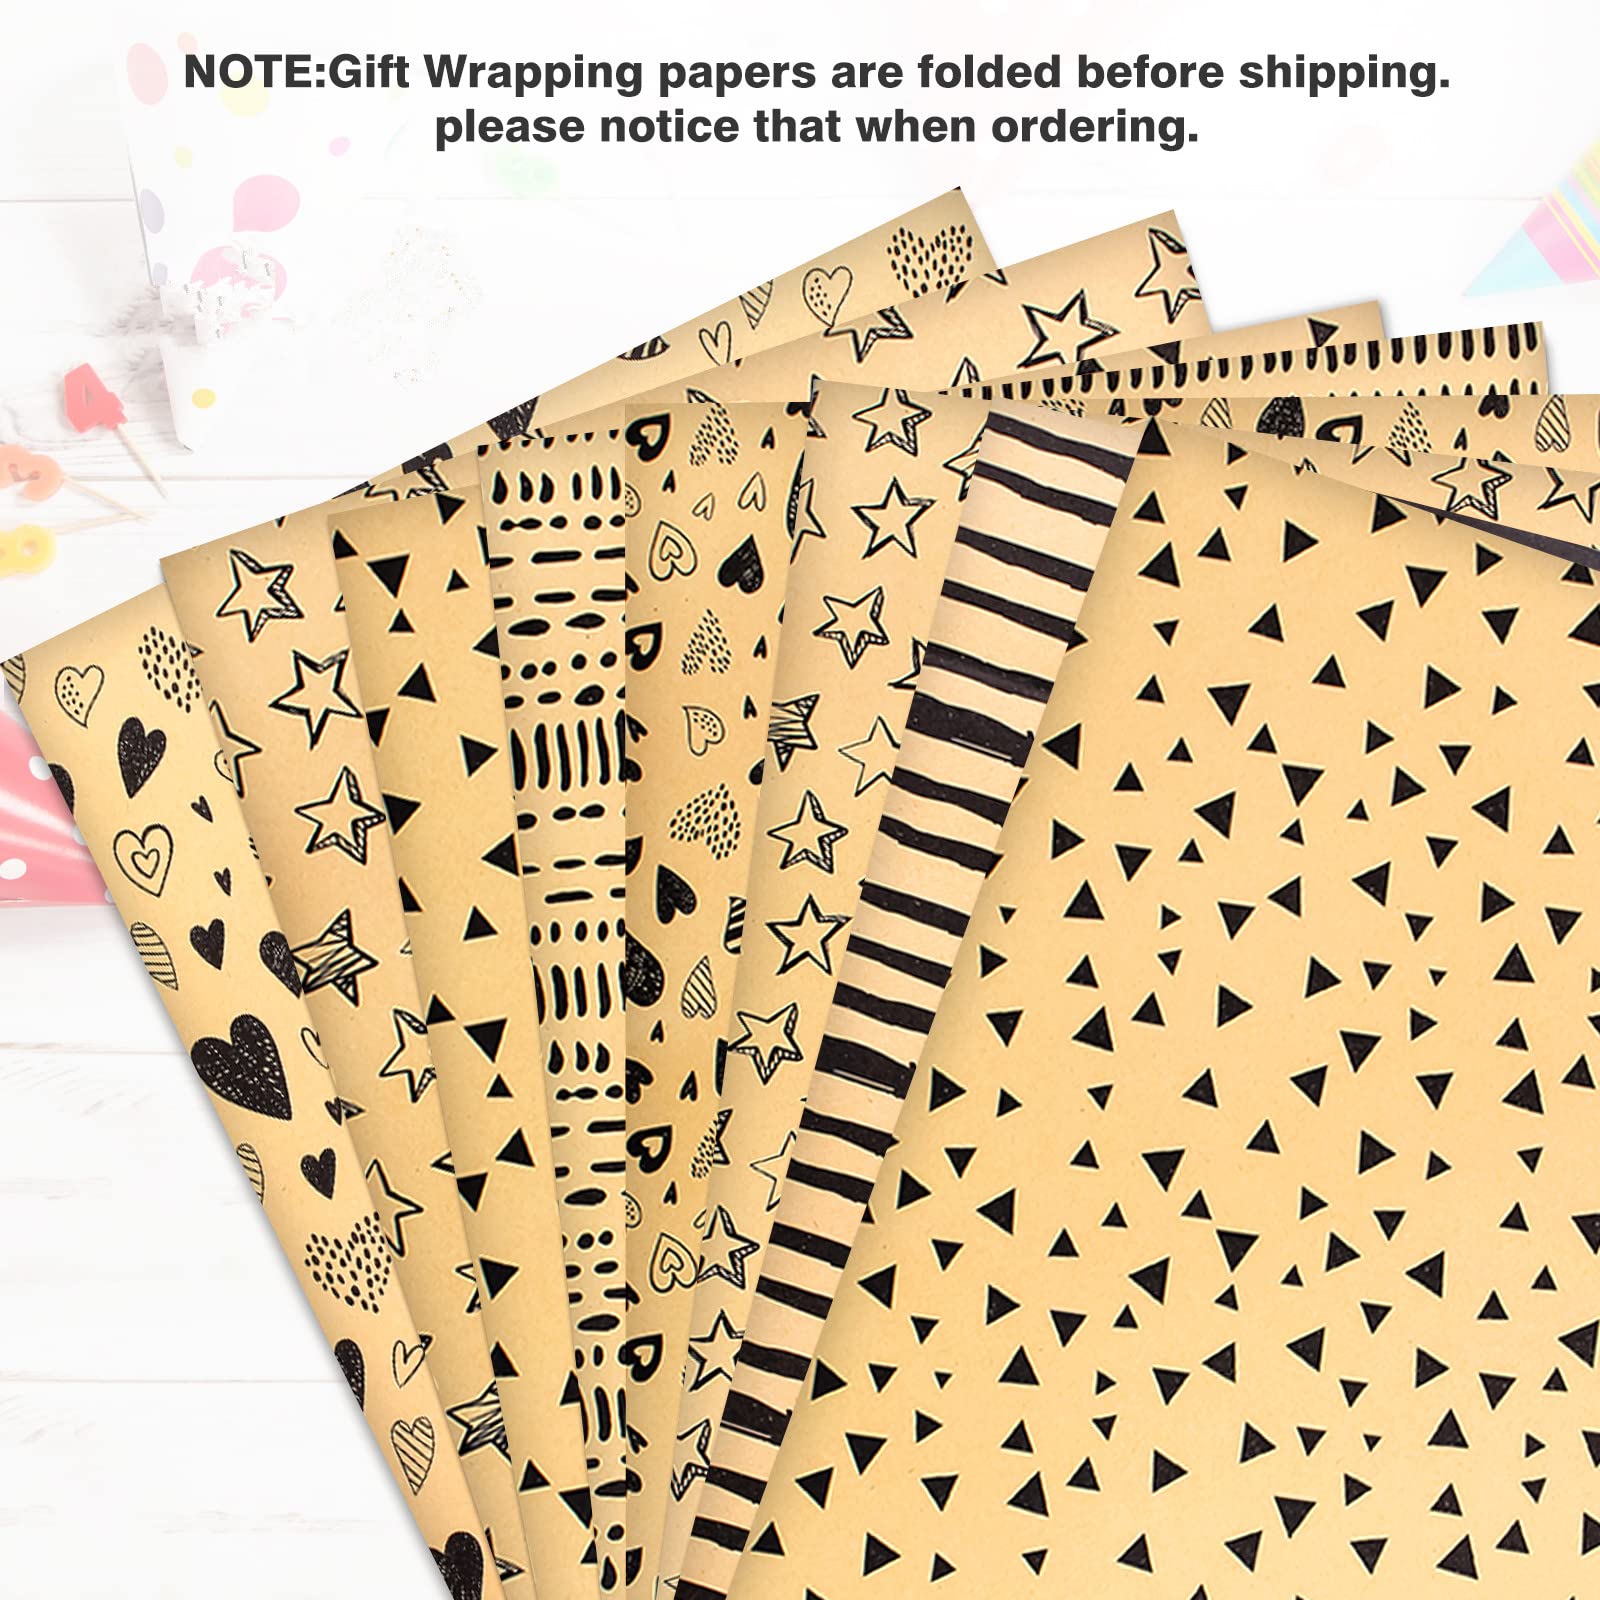 Wrapping Paper Sheets-Gift Wrapping Paper Set with FREE Tags & String-Brown Kraft Wrapping Paper Birthday Gift Wrap for Present Wrapping Paper-Birthday Paper Birthday Wrap for Women Girl Men Boys Kids